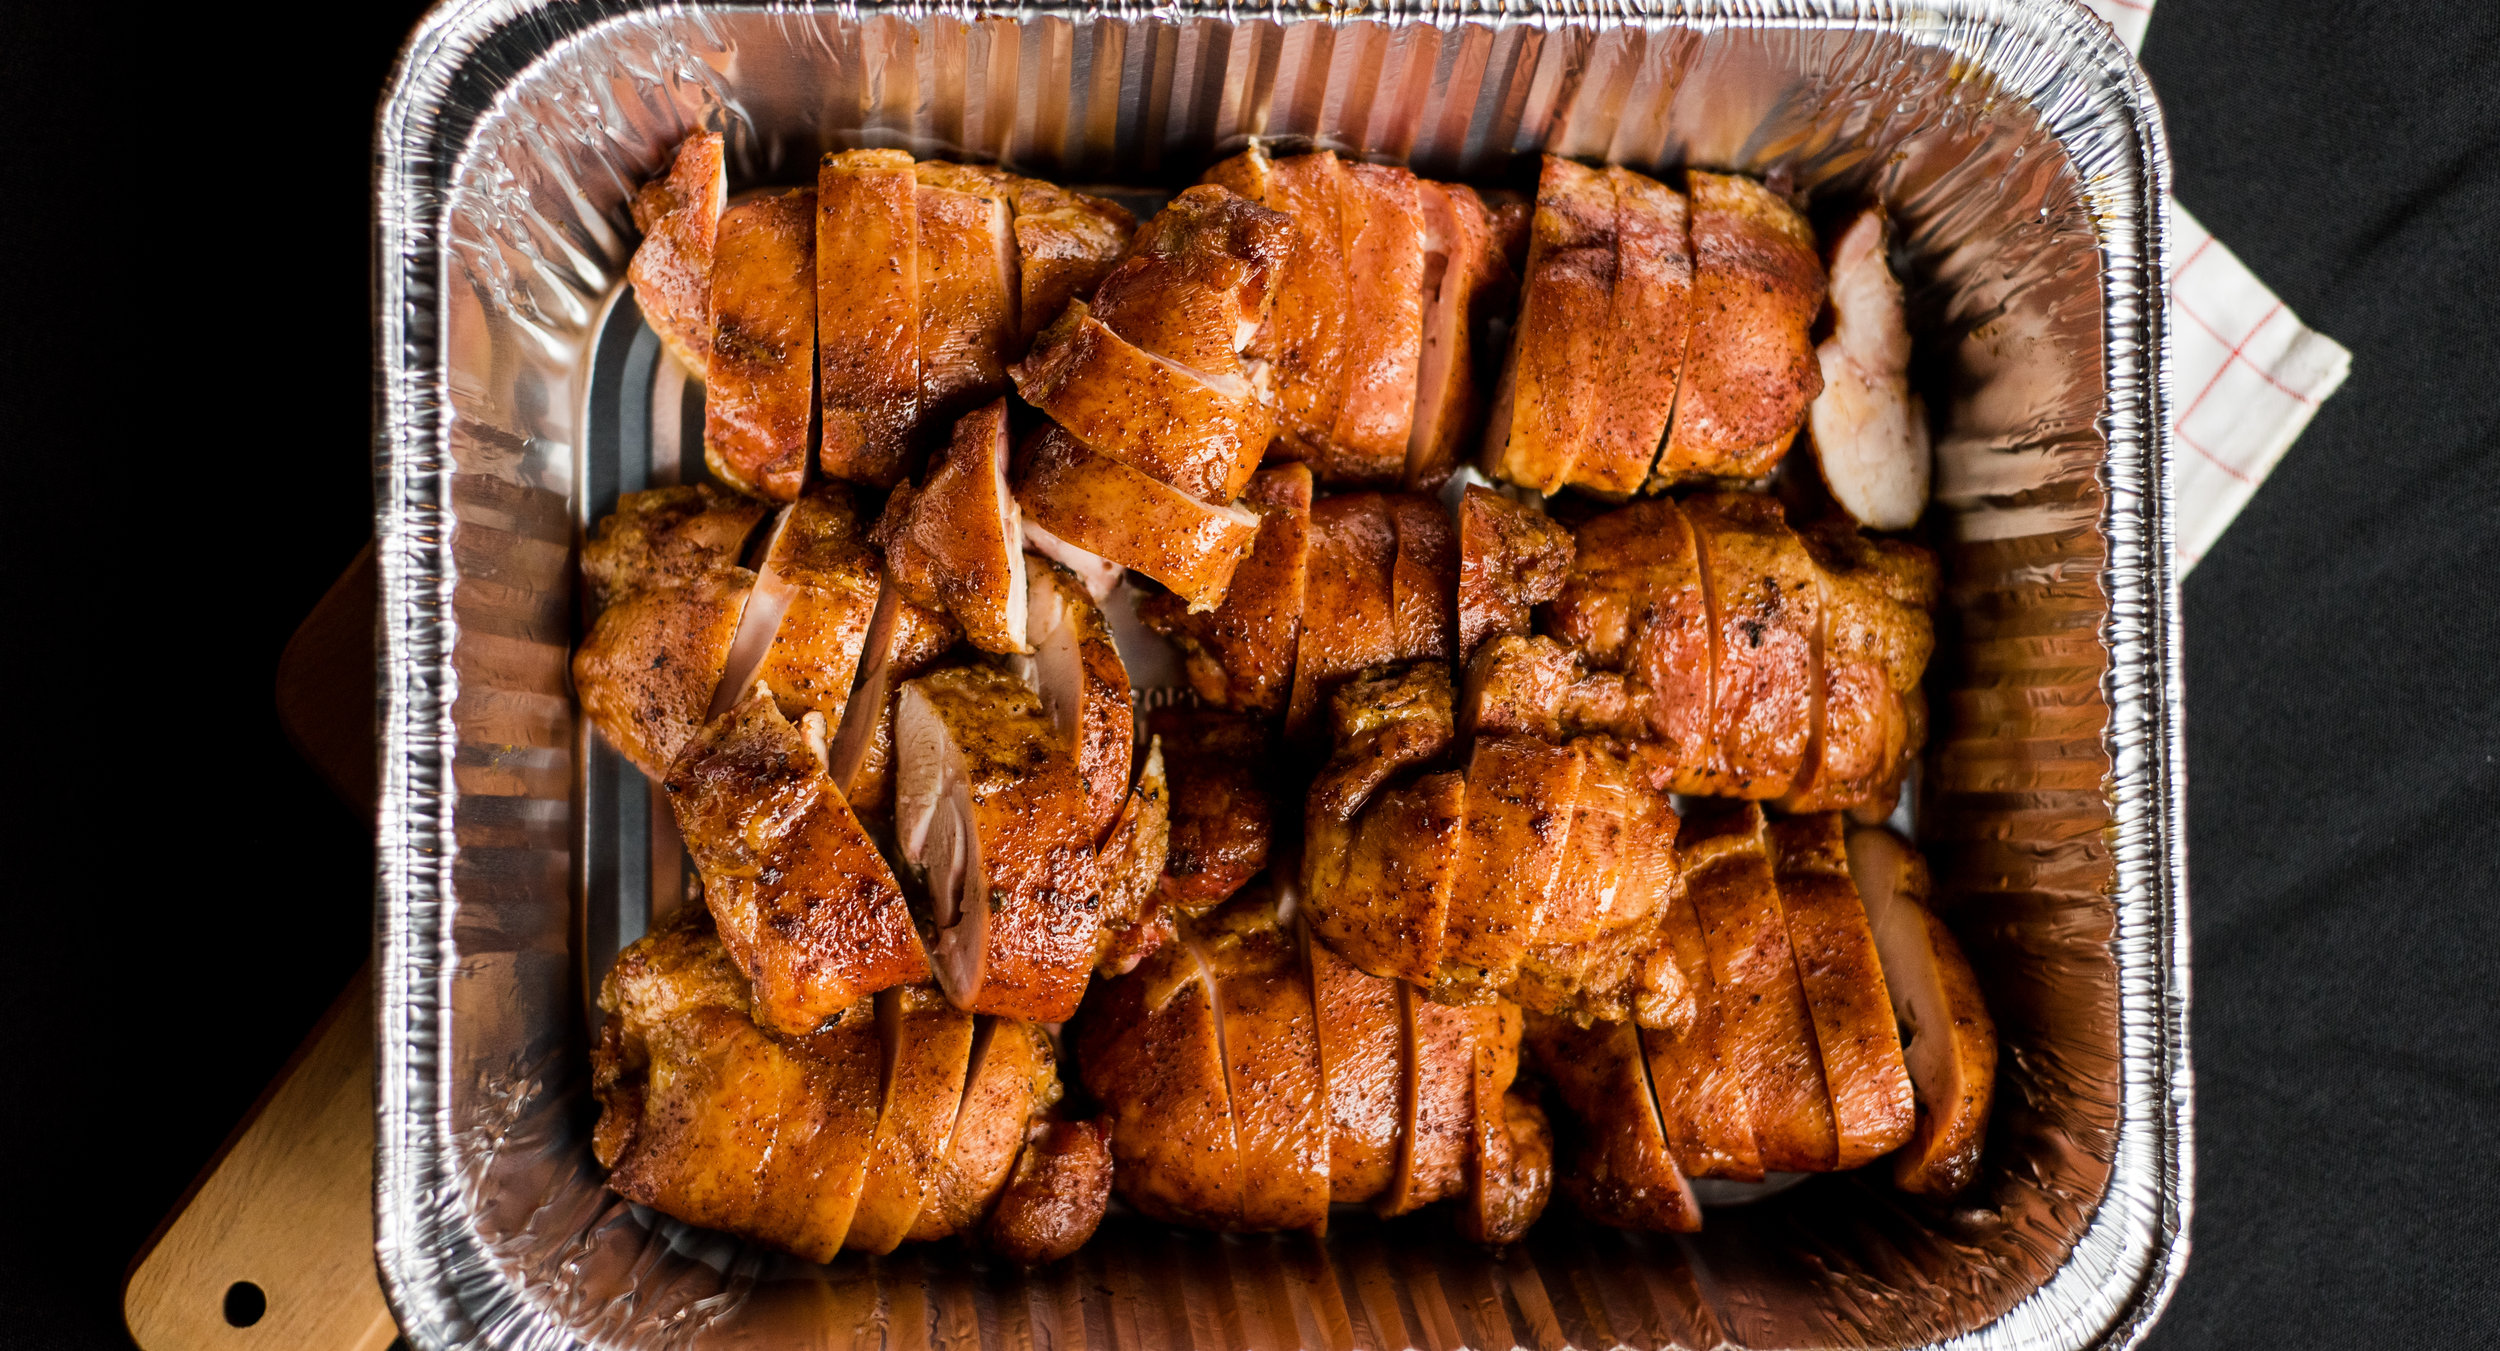 Smoked Chicken Thighs in Light Sauce - Moses Lake Wedding Caterer - Moses Lake BBQ Catering - Smulligan's BBQ Moses Lake, Washington